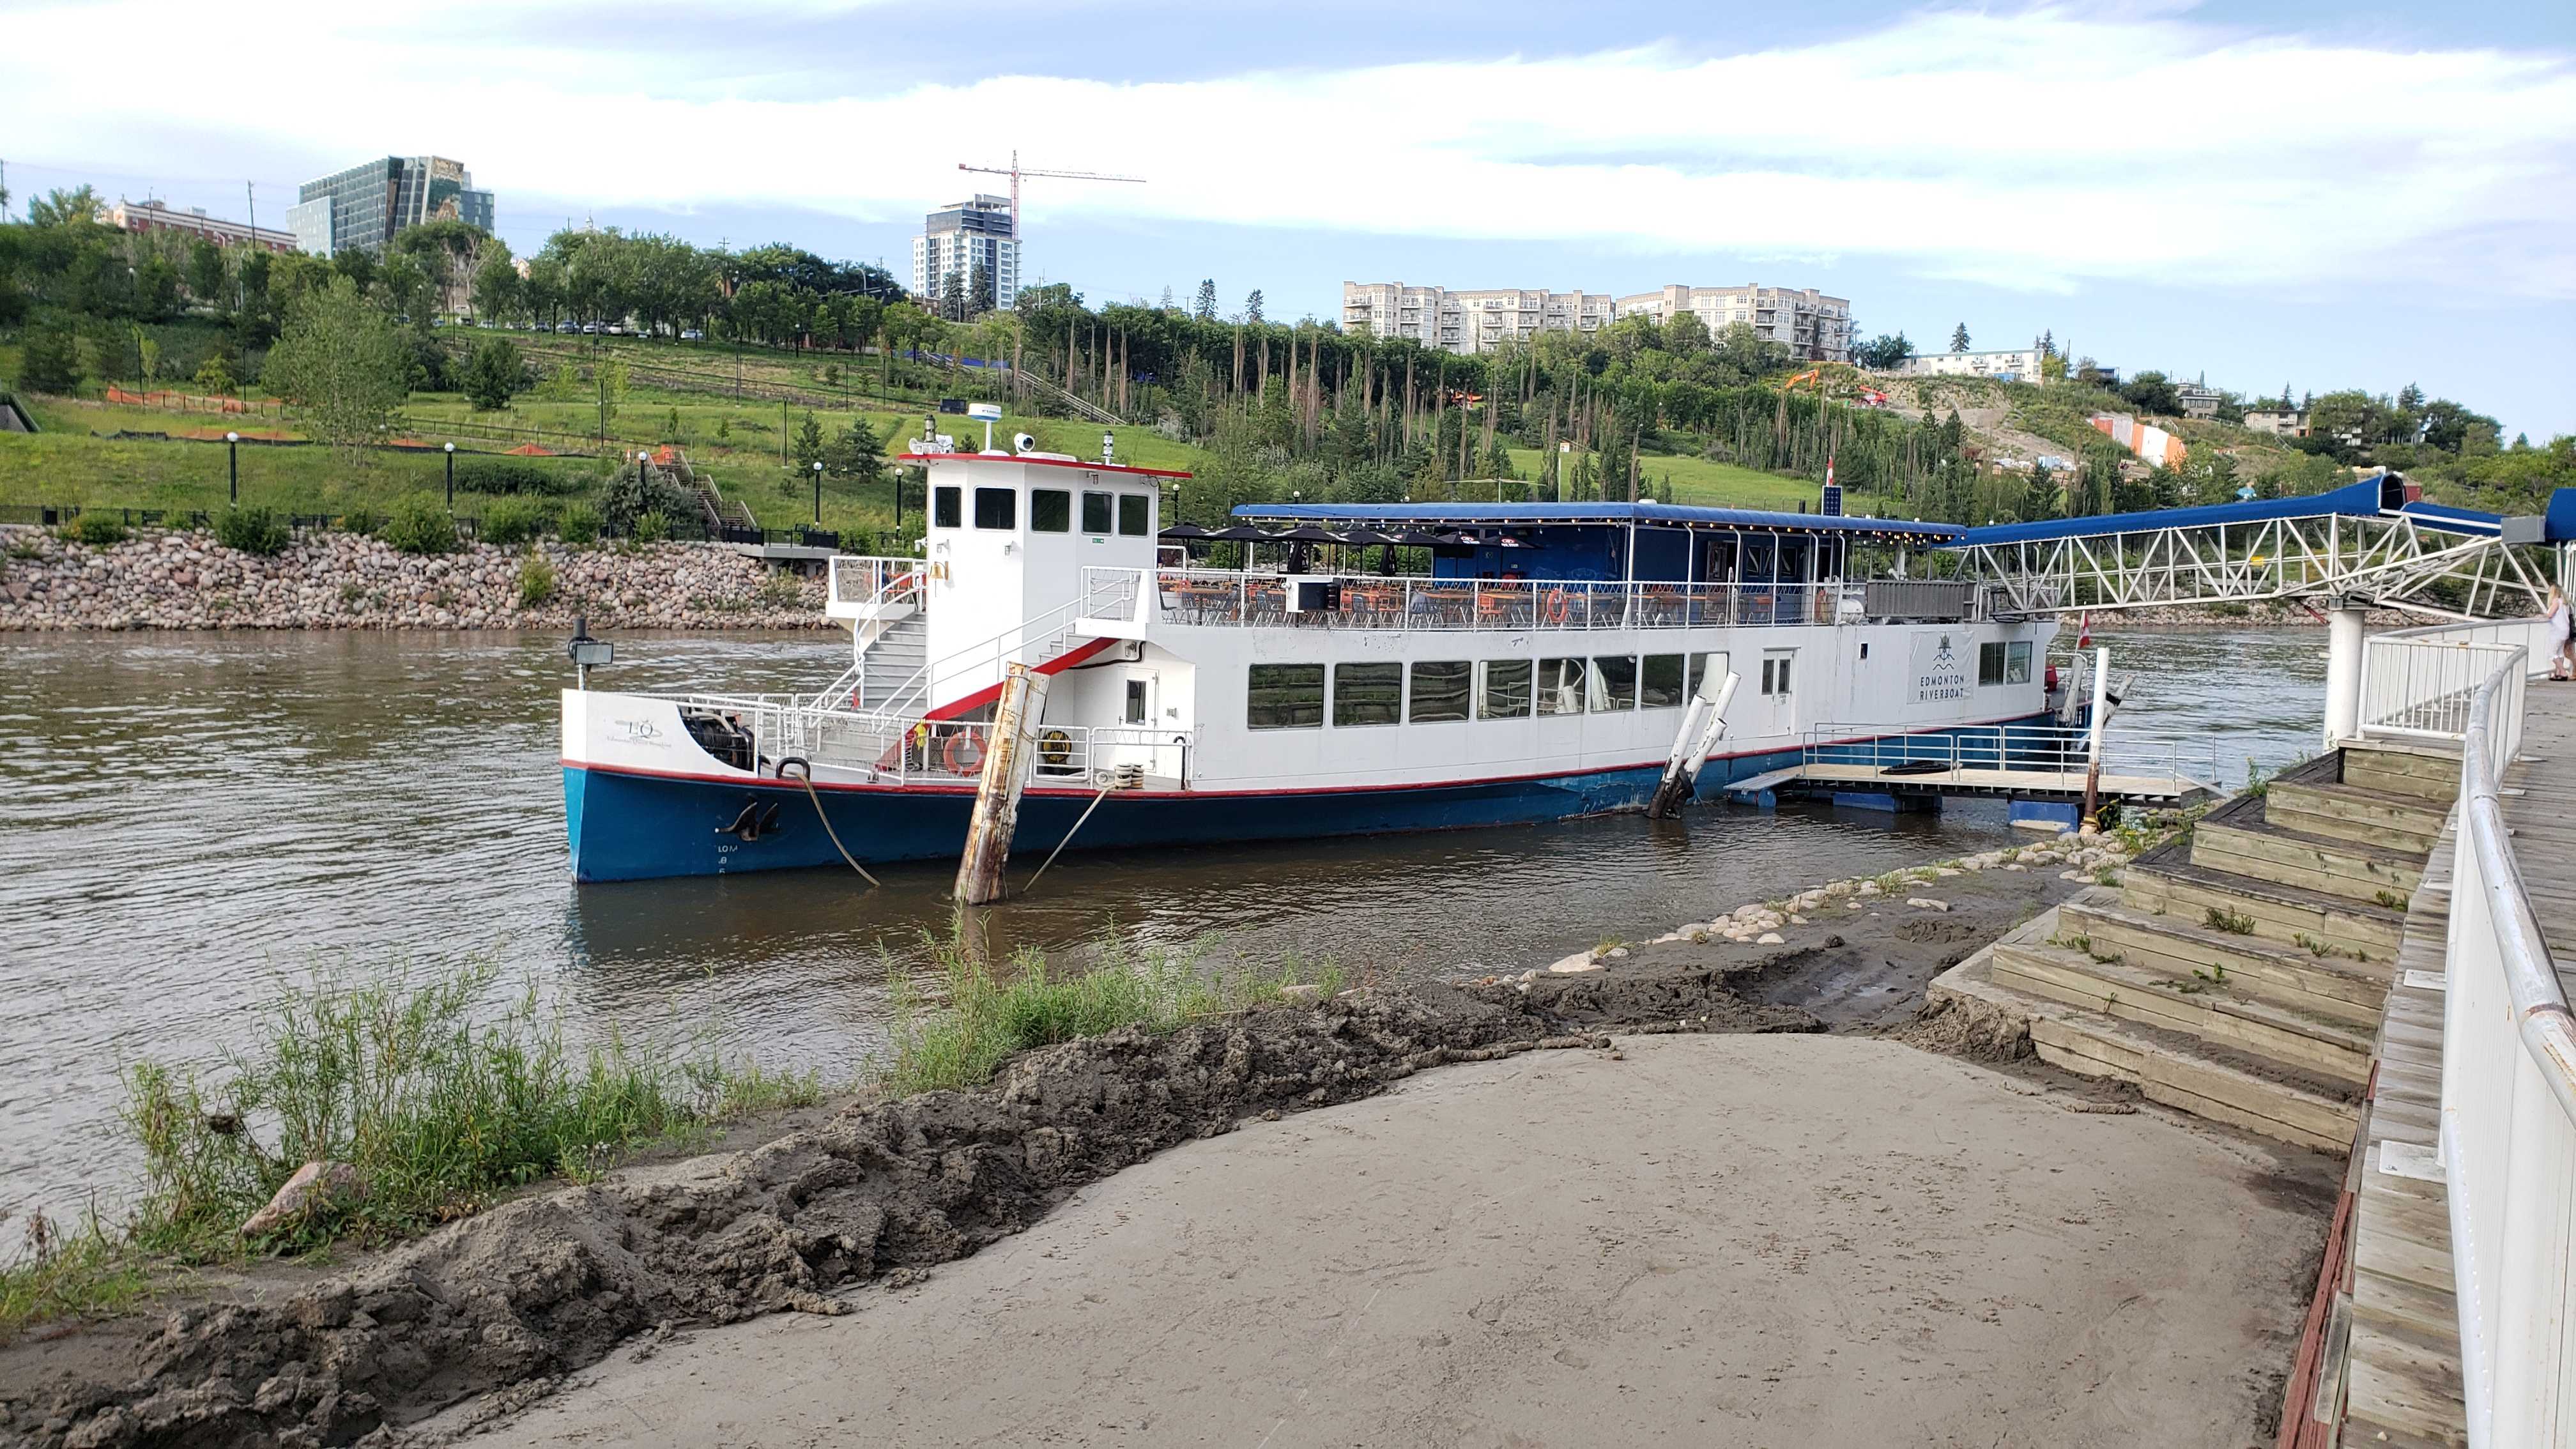 In the market for a riverboat? The Edmonton Queen is for sale - Edmonton